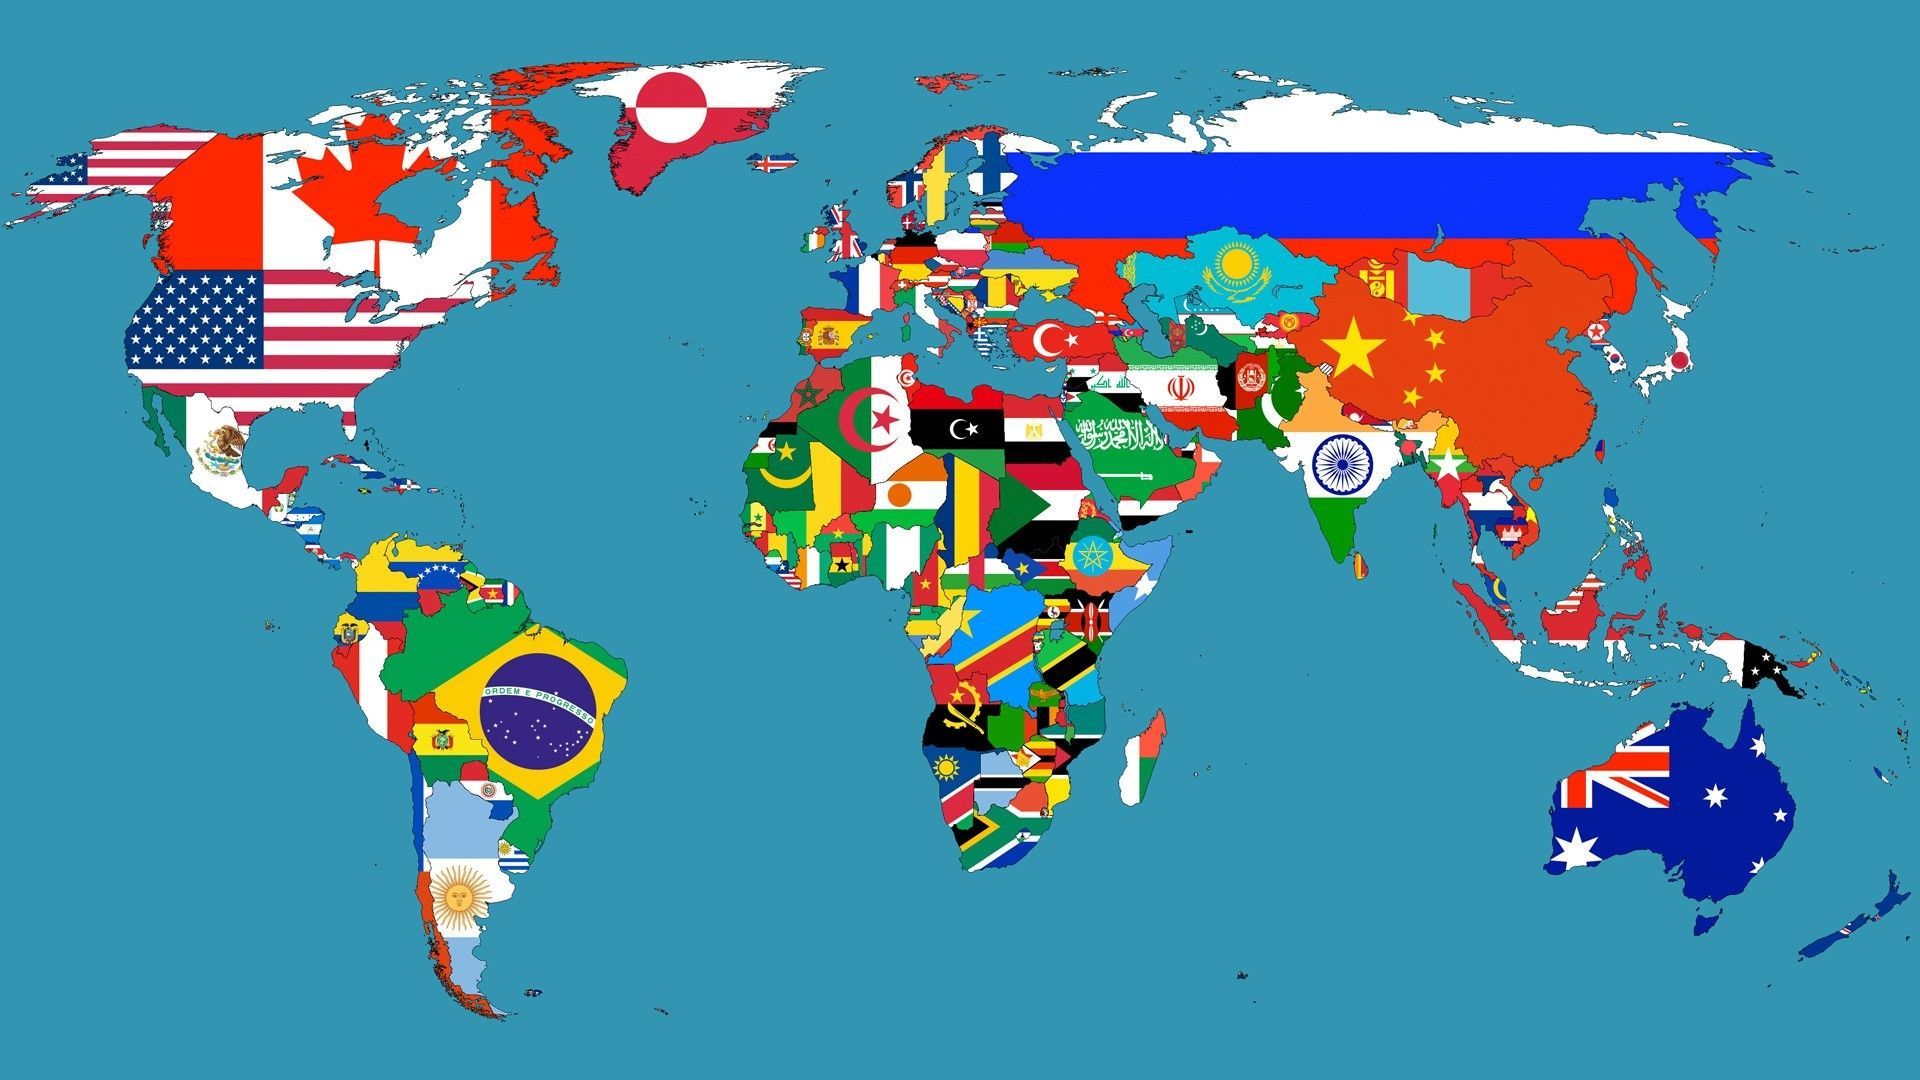 World Map Wallpaper Names Refrence Flags Maps Countries World Map Wallpaper New the Madriver. World map with countries, World map wallpaper, Flags of the world